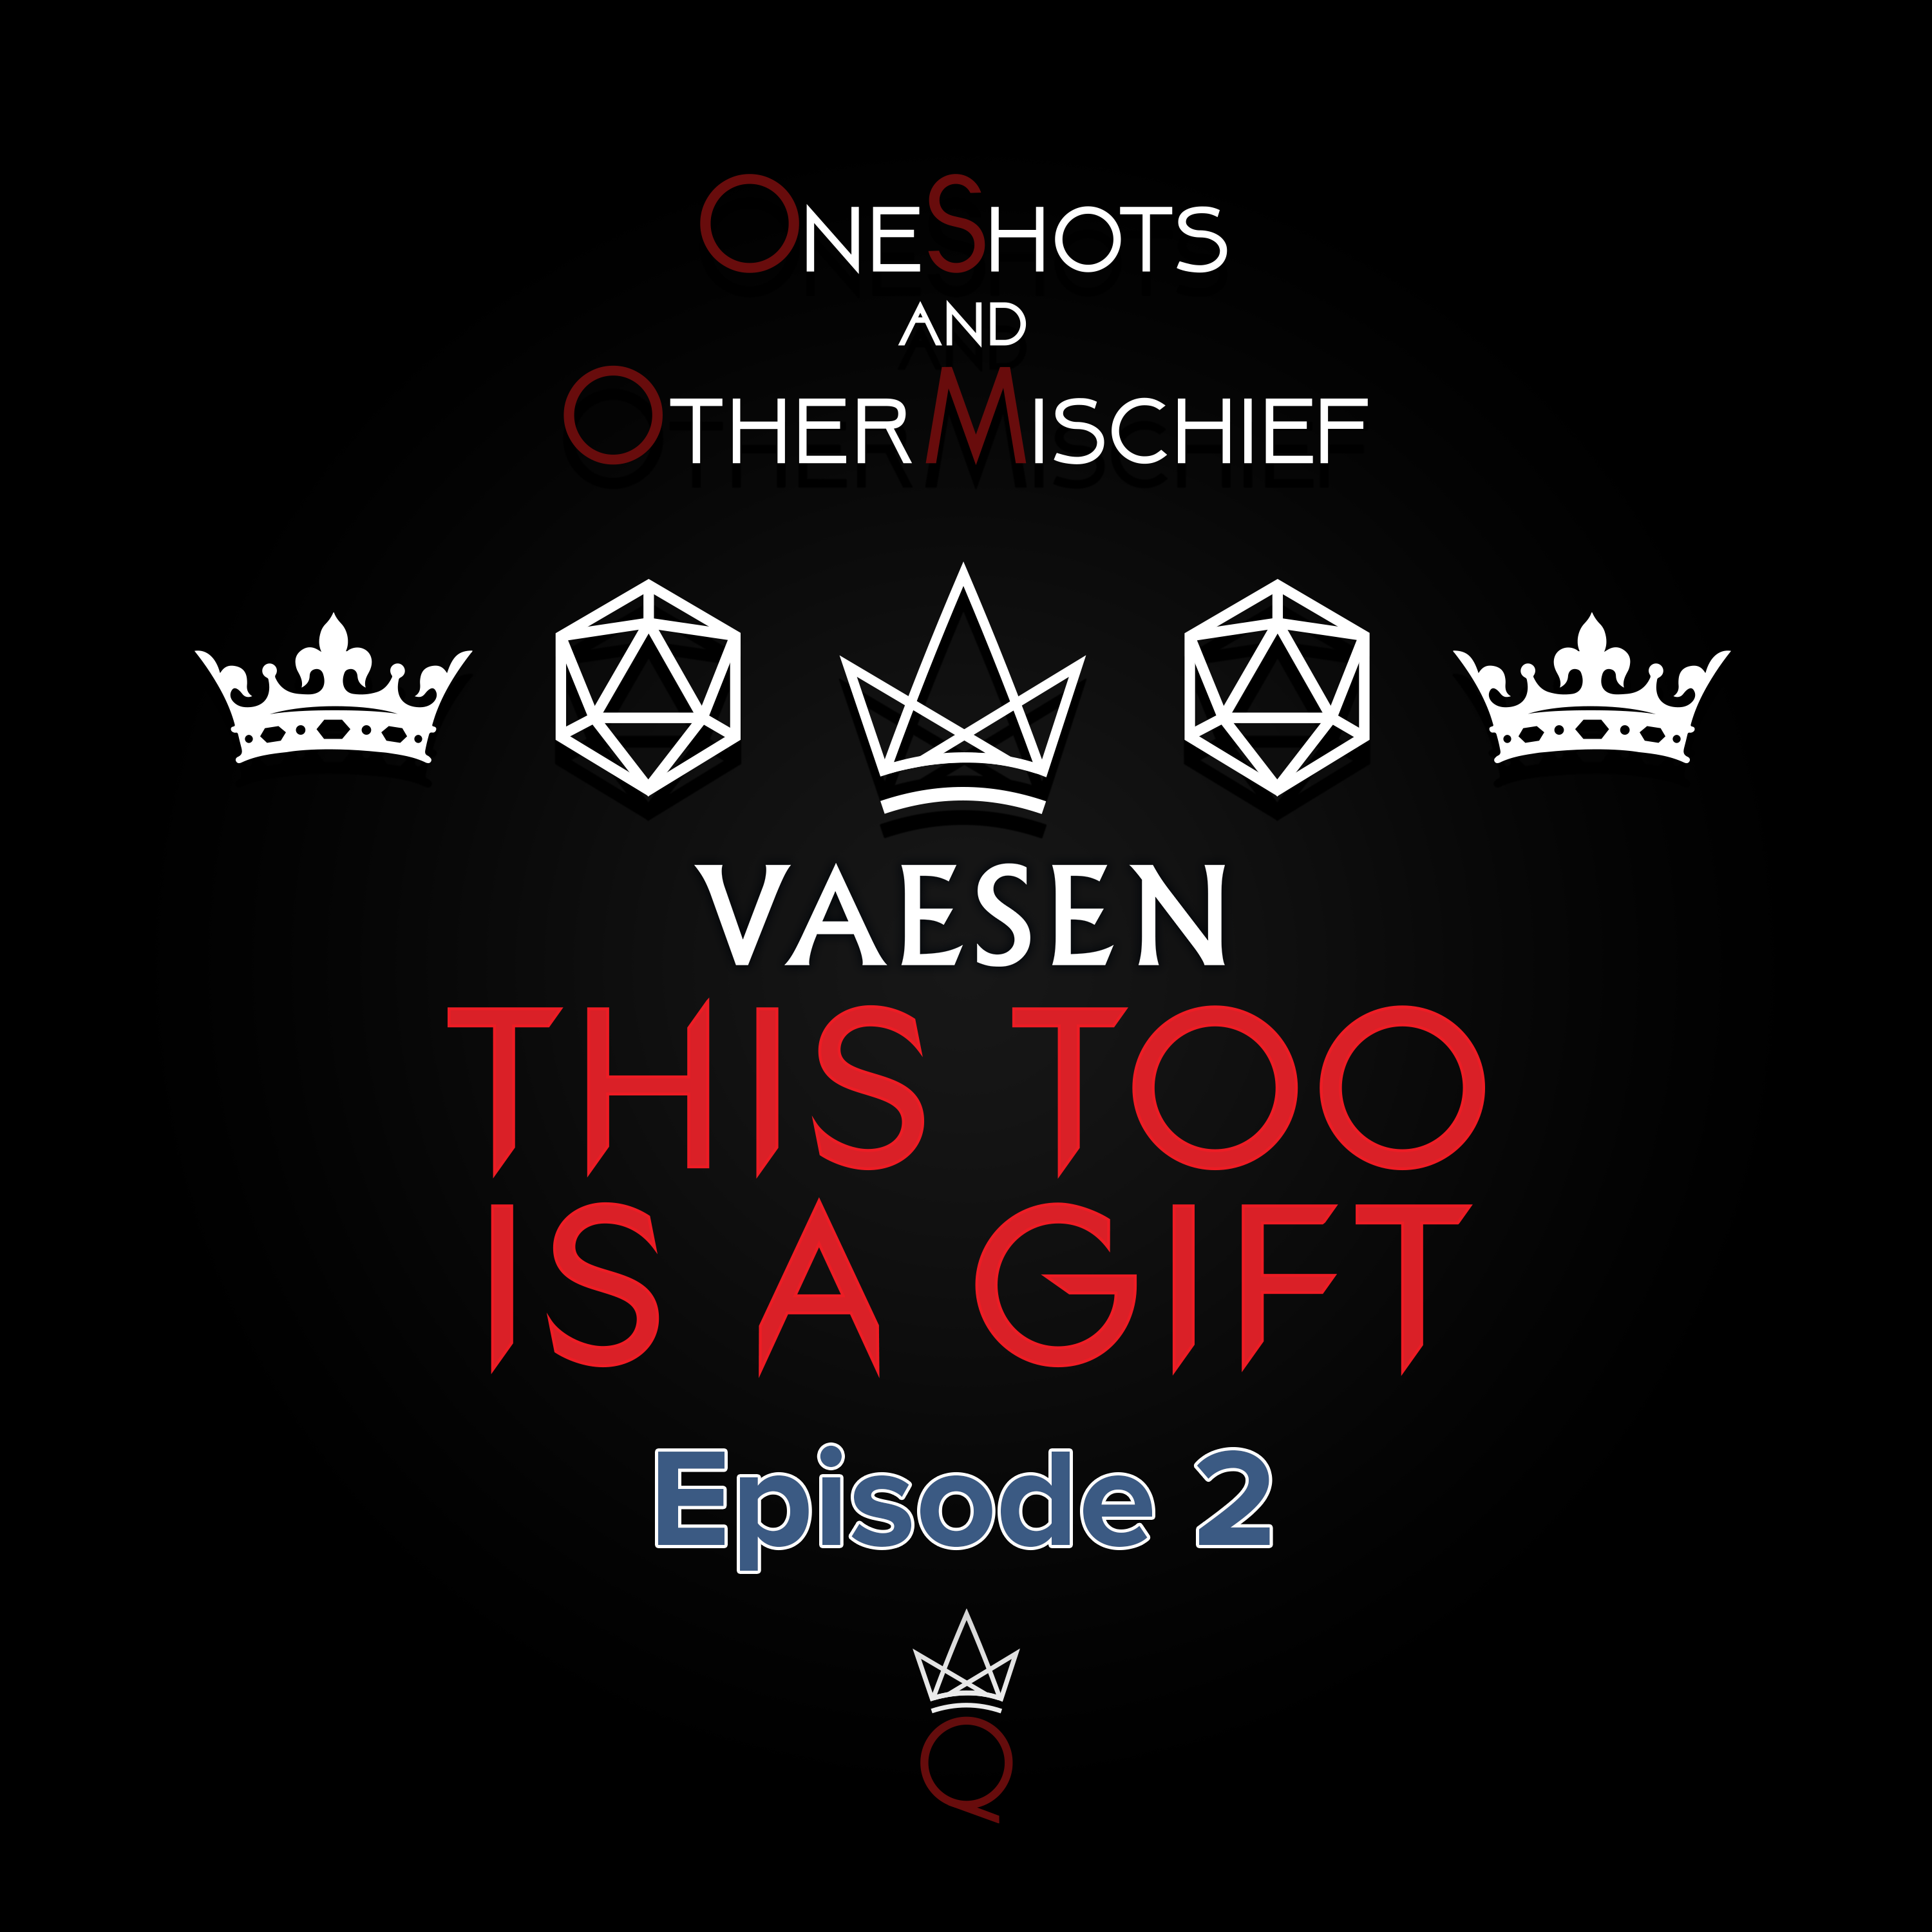 Vaesen - This Too is a Gift, Episode 2